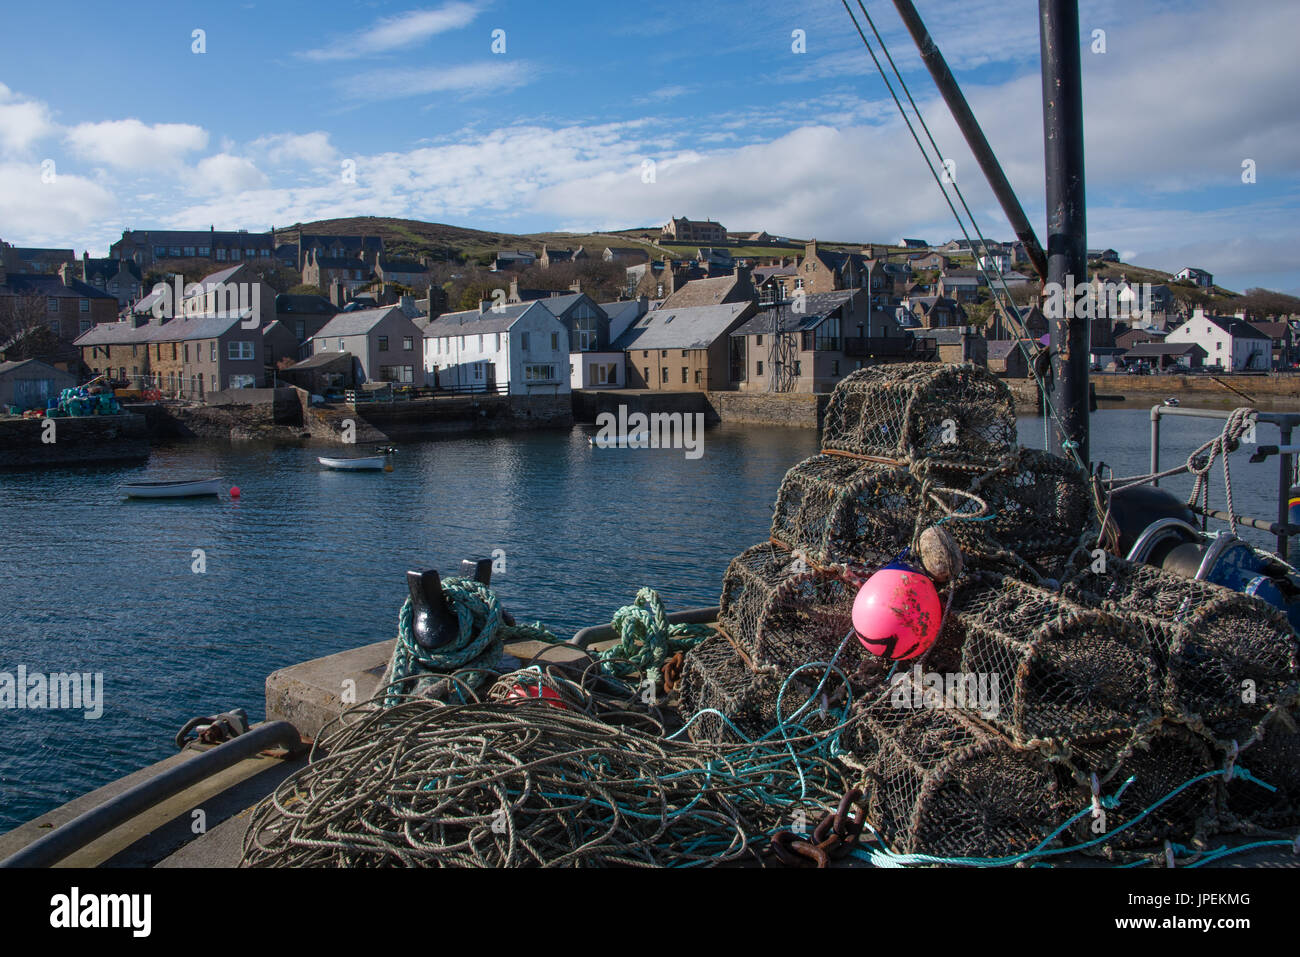 The West pier in Stromness harbour is littered with fihing equipment - nets, fish crates, old rope and other paraphernalia Stock Photo